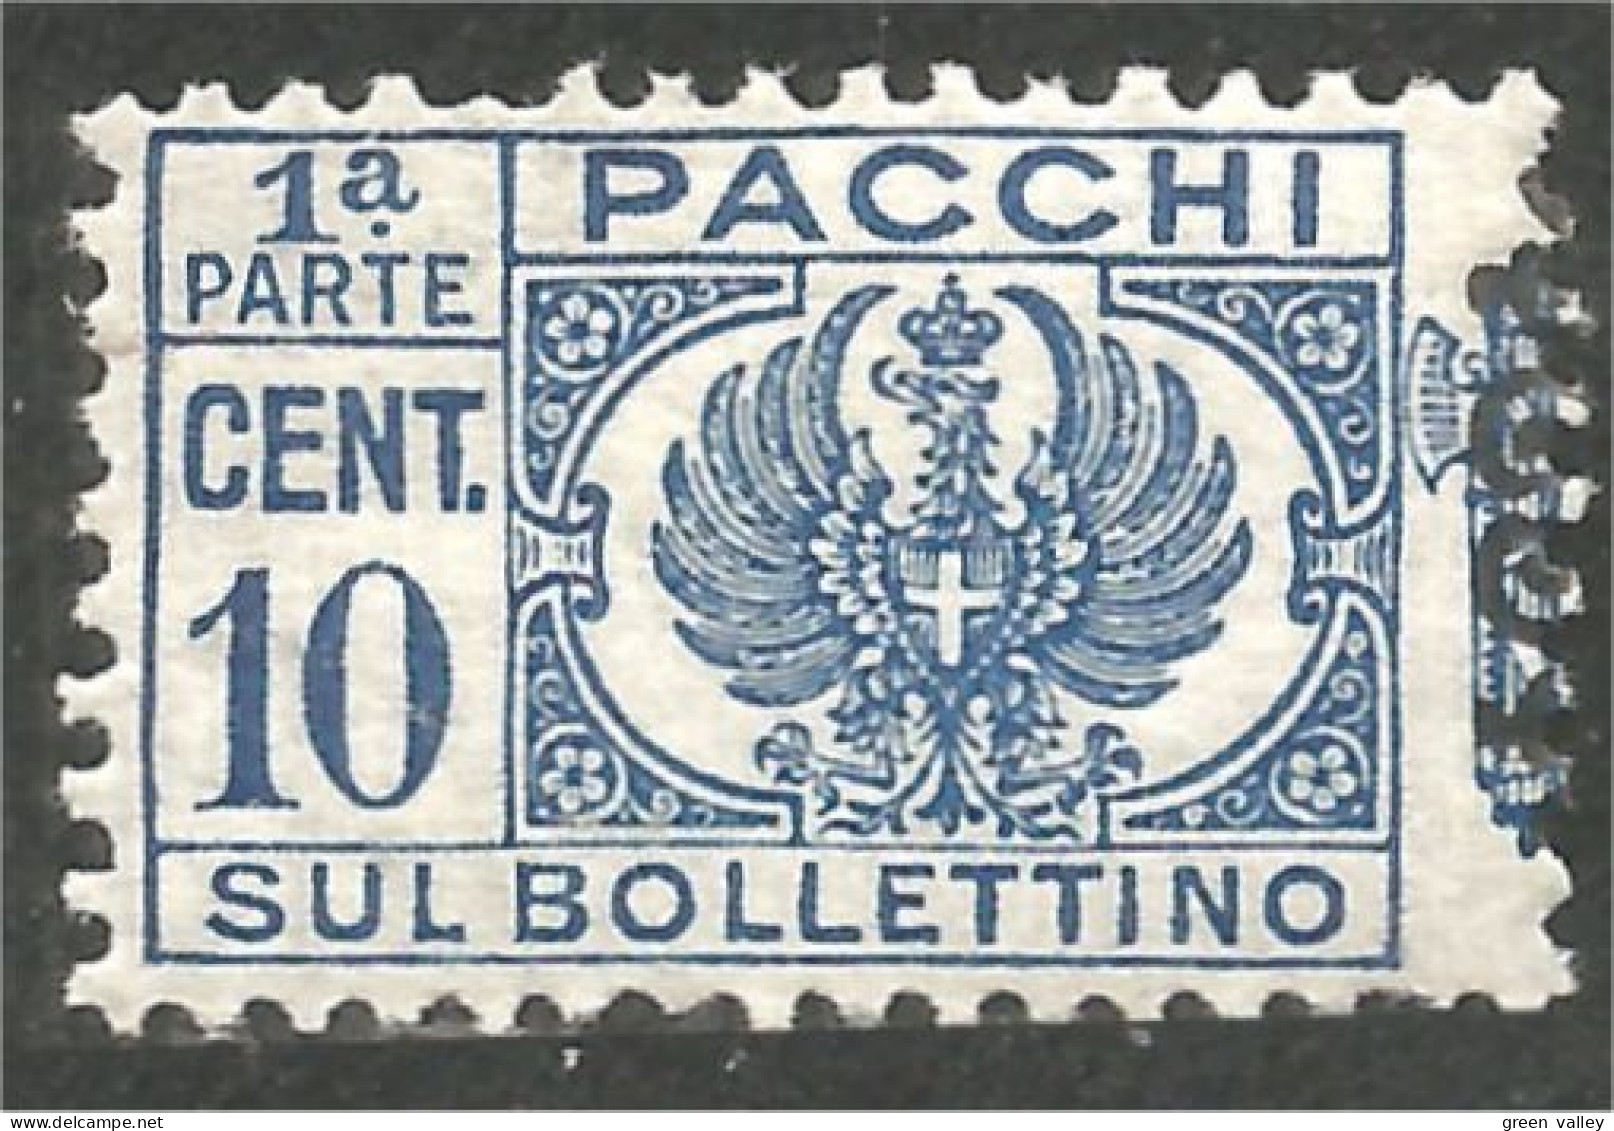 XW01-0164 Italy Paquet Parcel 10 Cent MH * Neuf - Unclassified